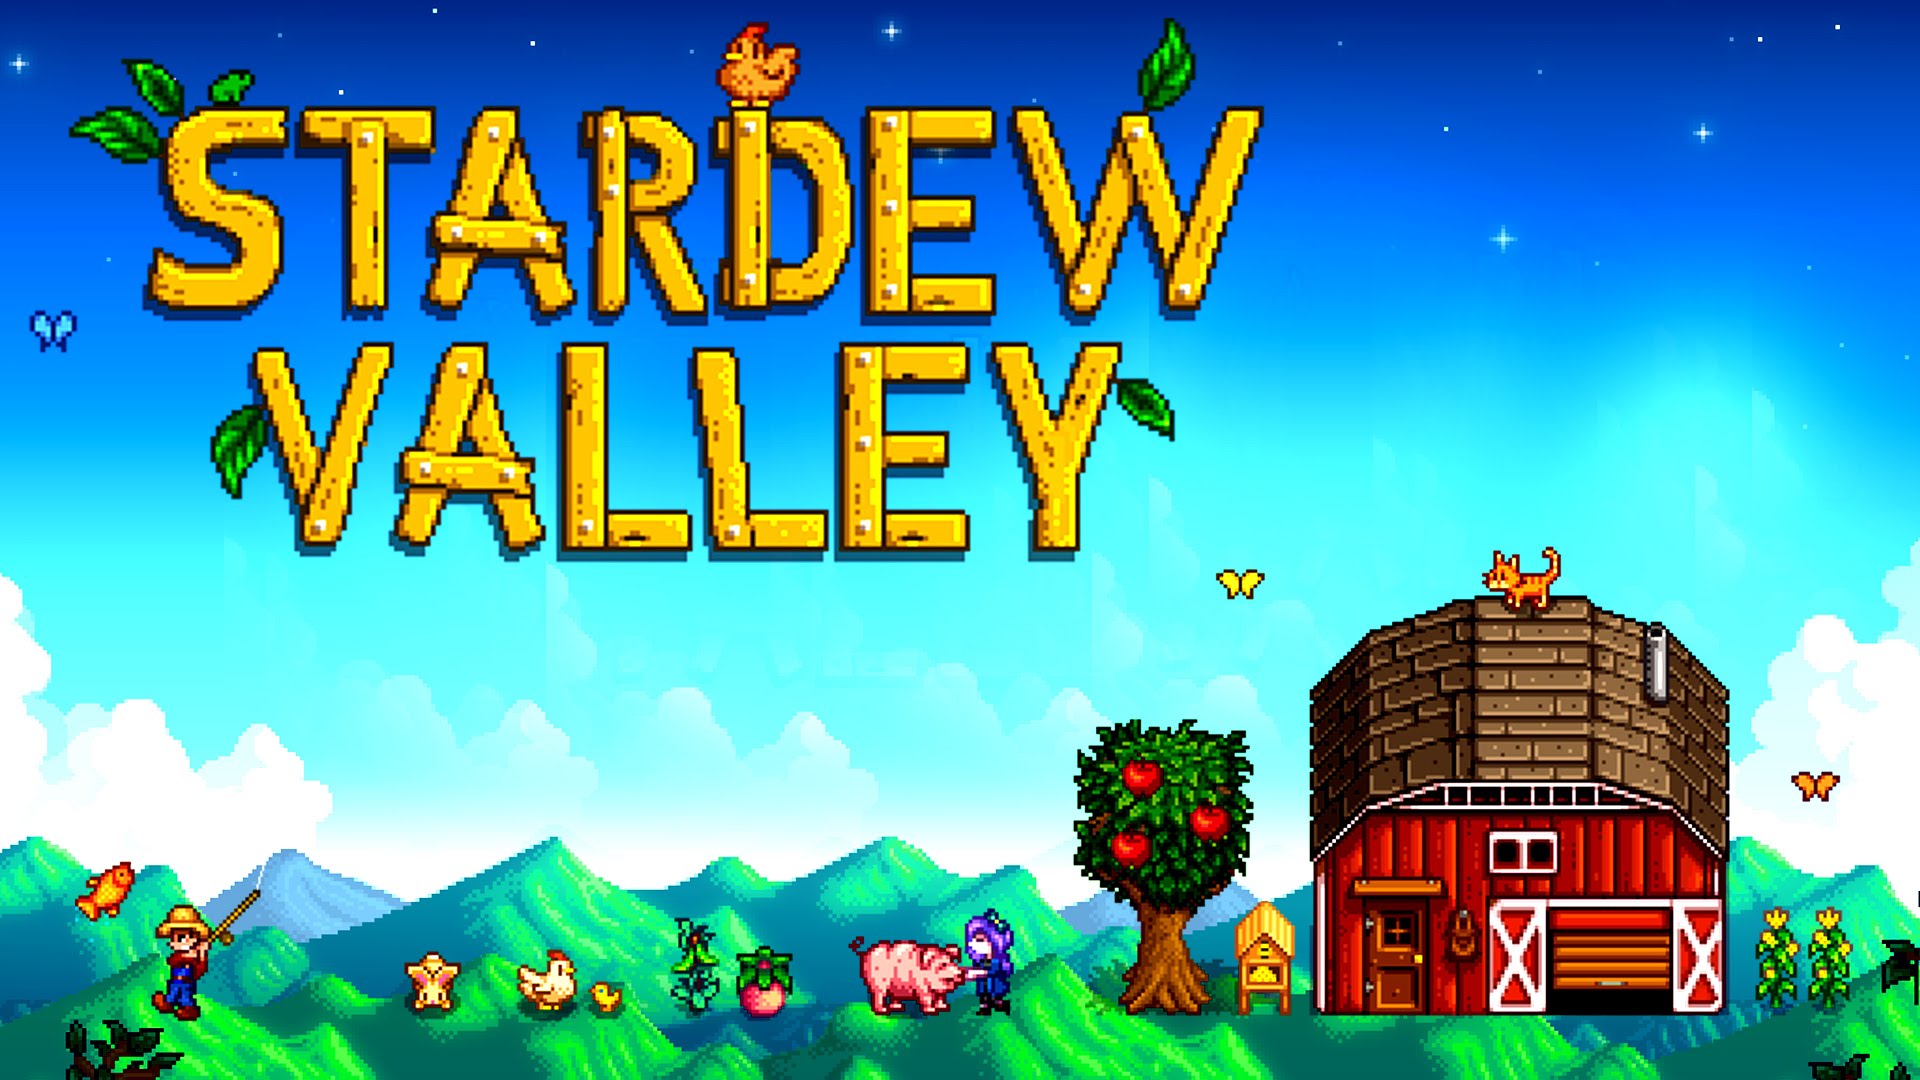 In-game screenshot of Stardew Valley showing a farm scene